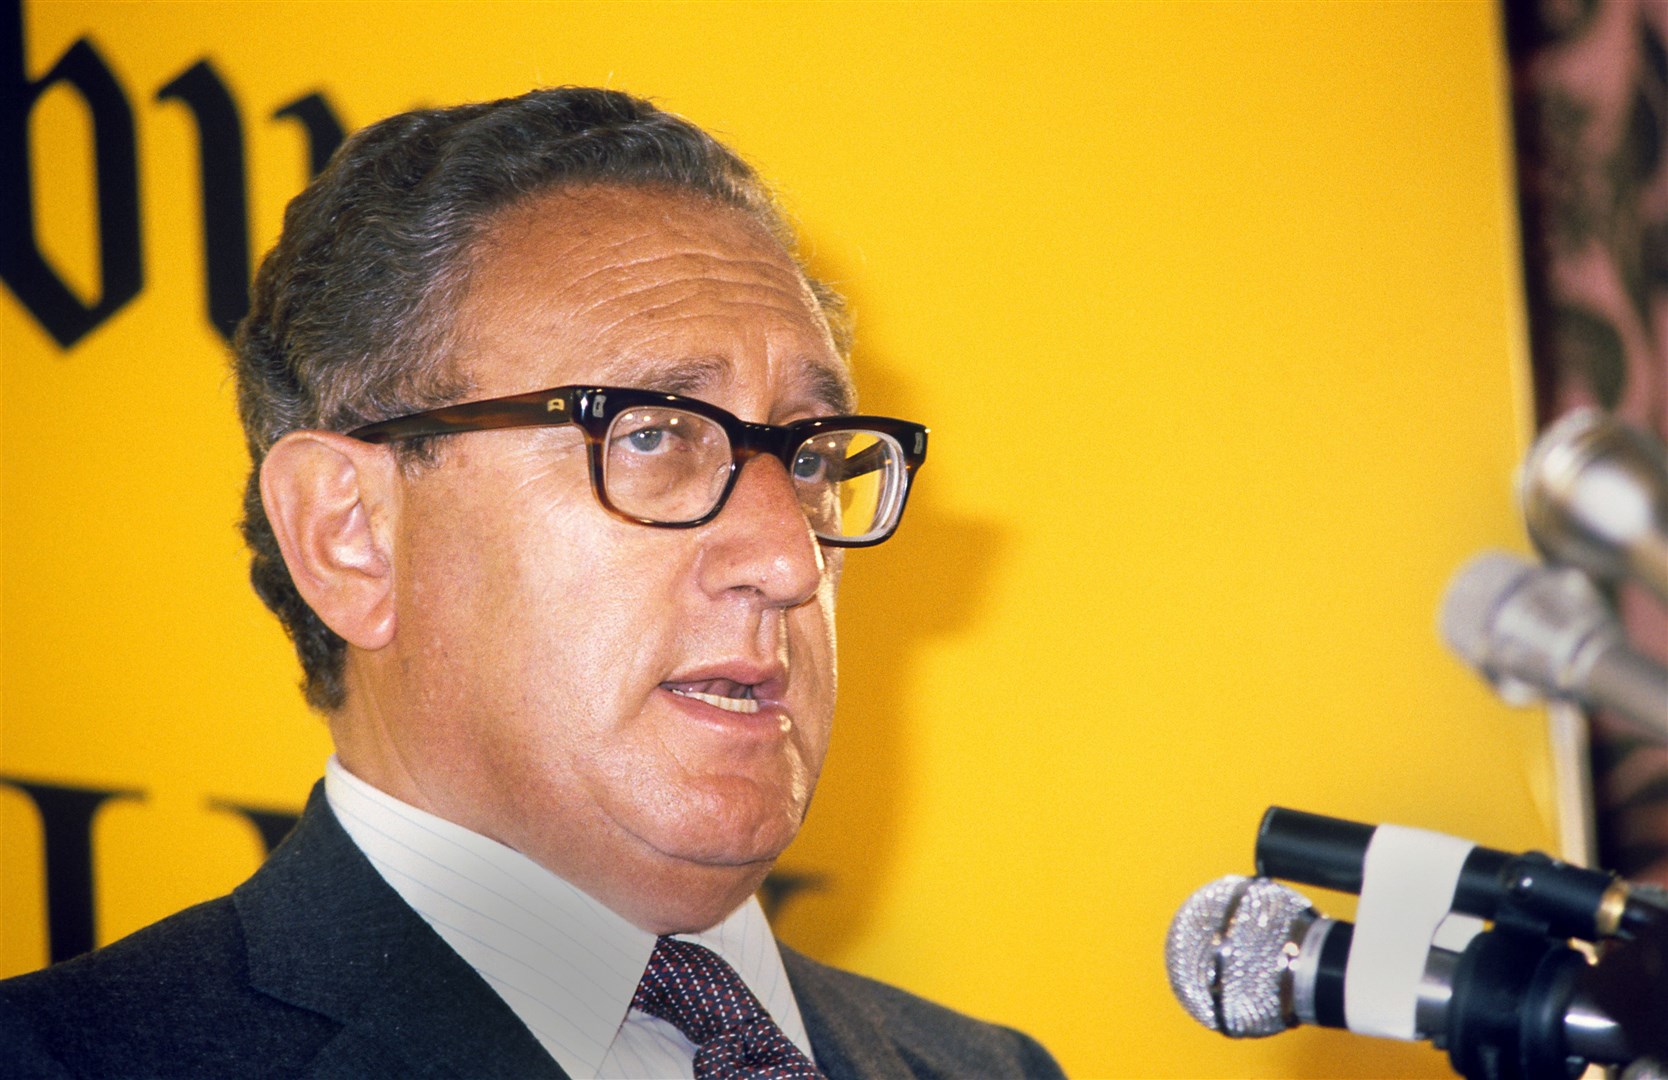 International politics and oil were discussed by Mr Kissinger during this 1980 press conference in London (PA)